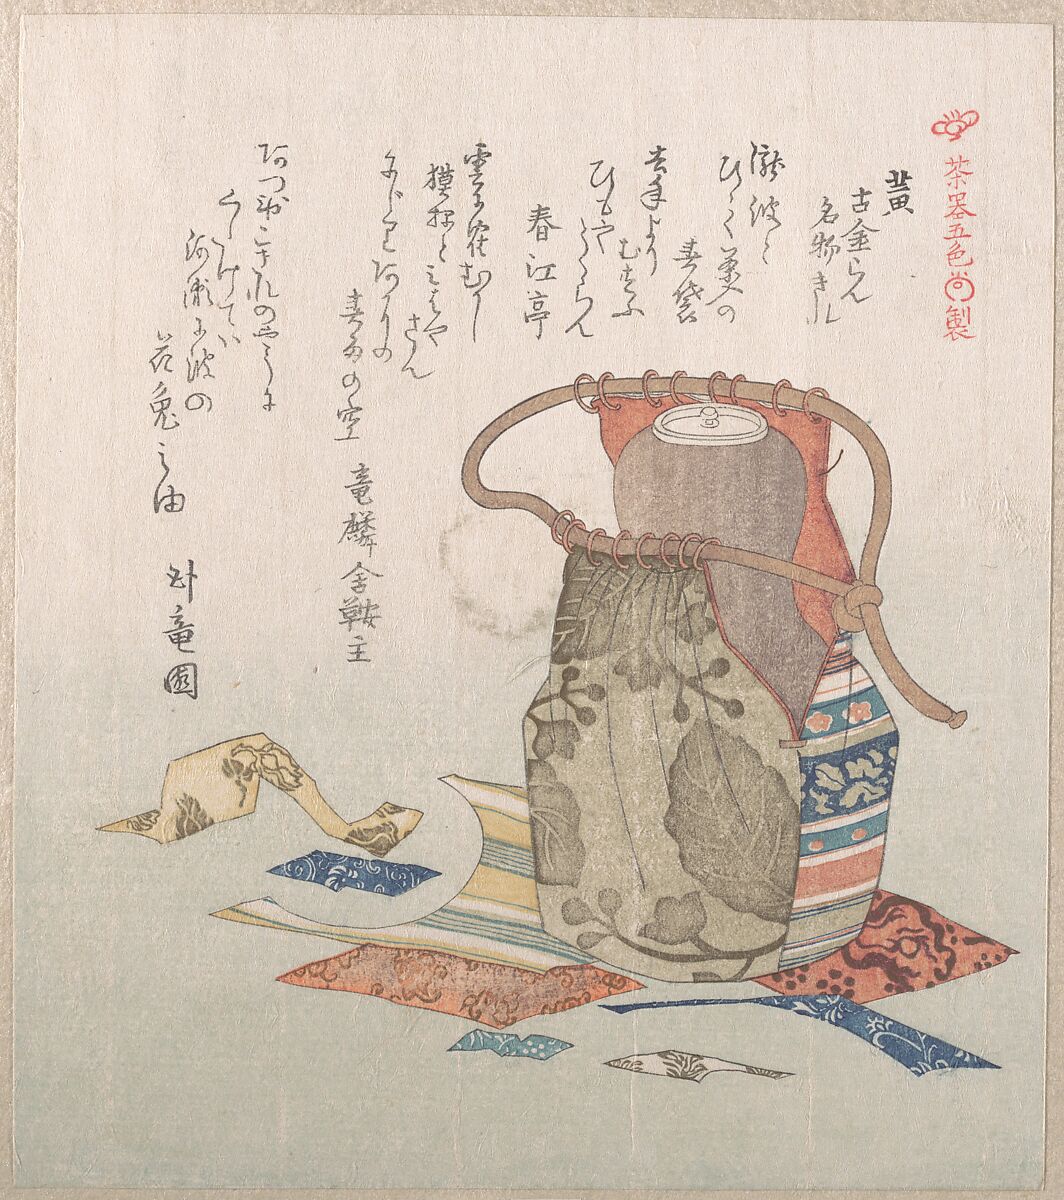 Yellow; Tea Jar with Cover and Fragments of Brocade, Kubo Shunman (Japanese, 1757–1820), Part of an album of woodblock prints (surimono); ink and color on paper, Japan 